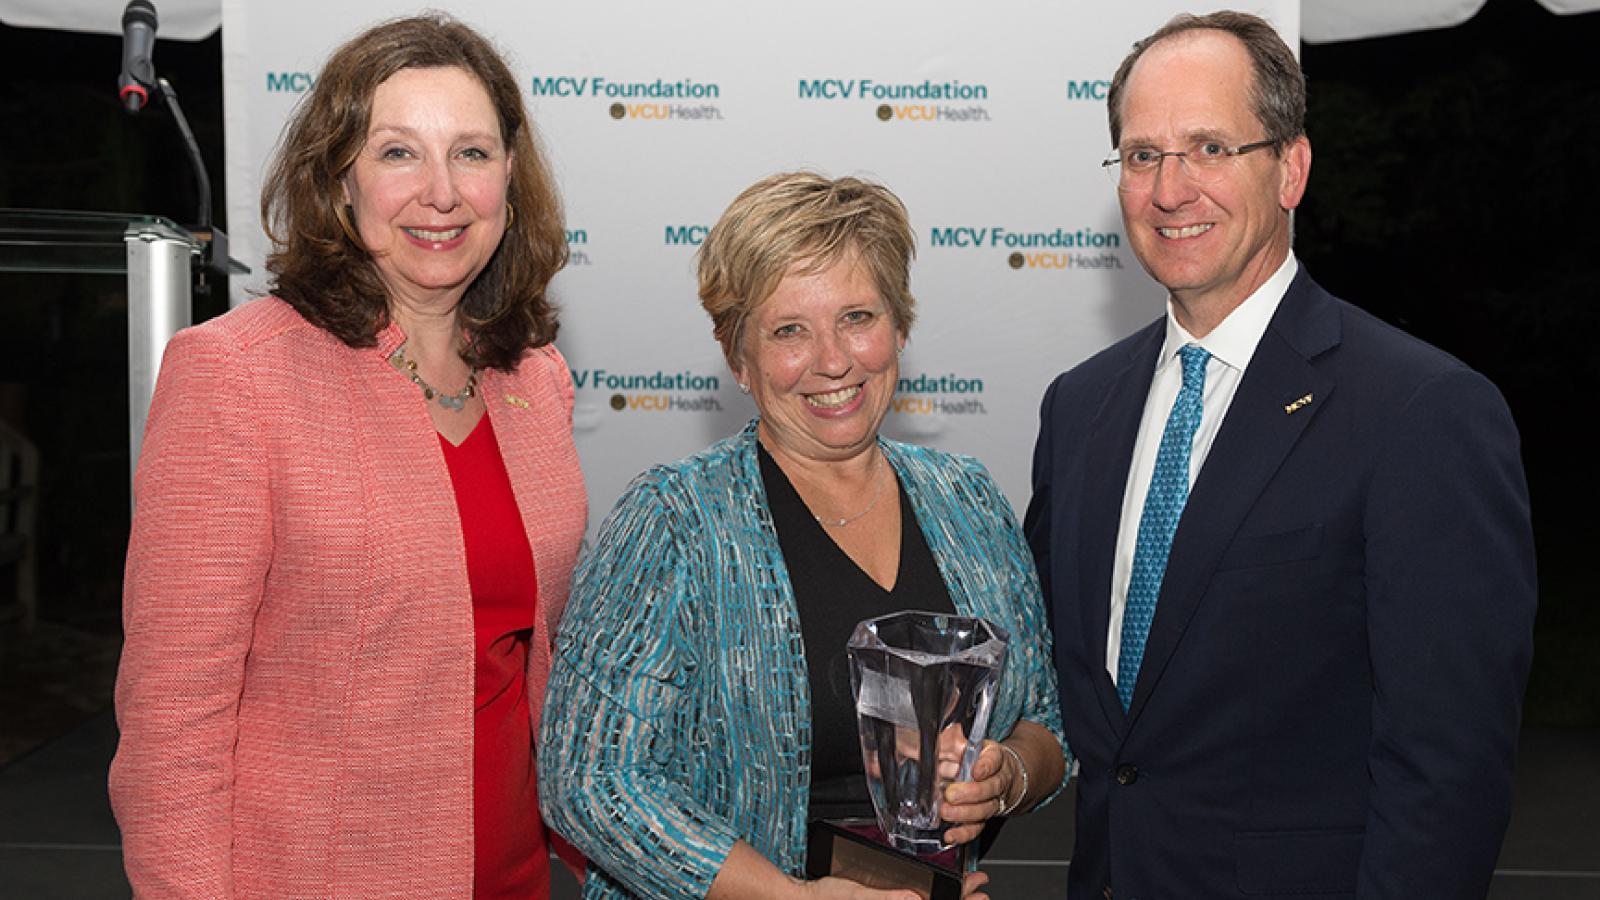 Pam Parsons, RN, Ph.D., with Margaret Ann Bollmeier, president and CEO of the MCV Foundation, and Wyatt Beazley IV, the foundation's board chair.